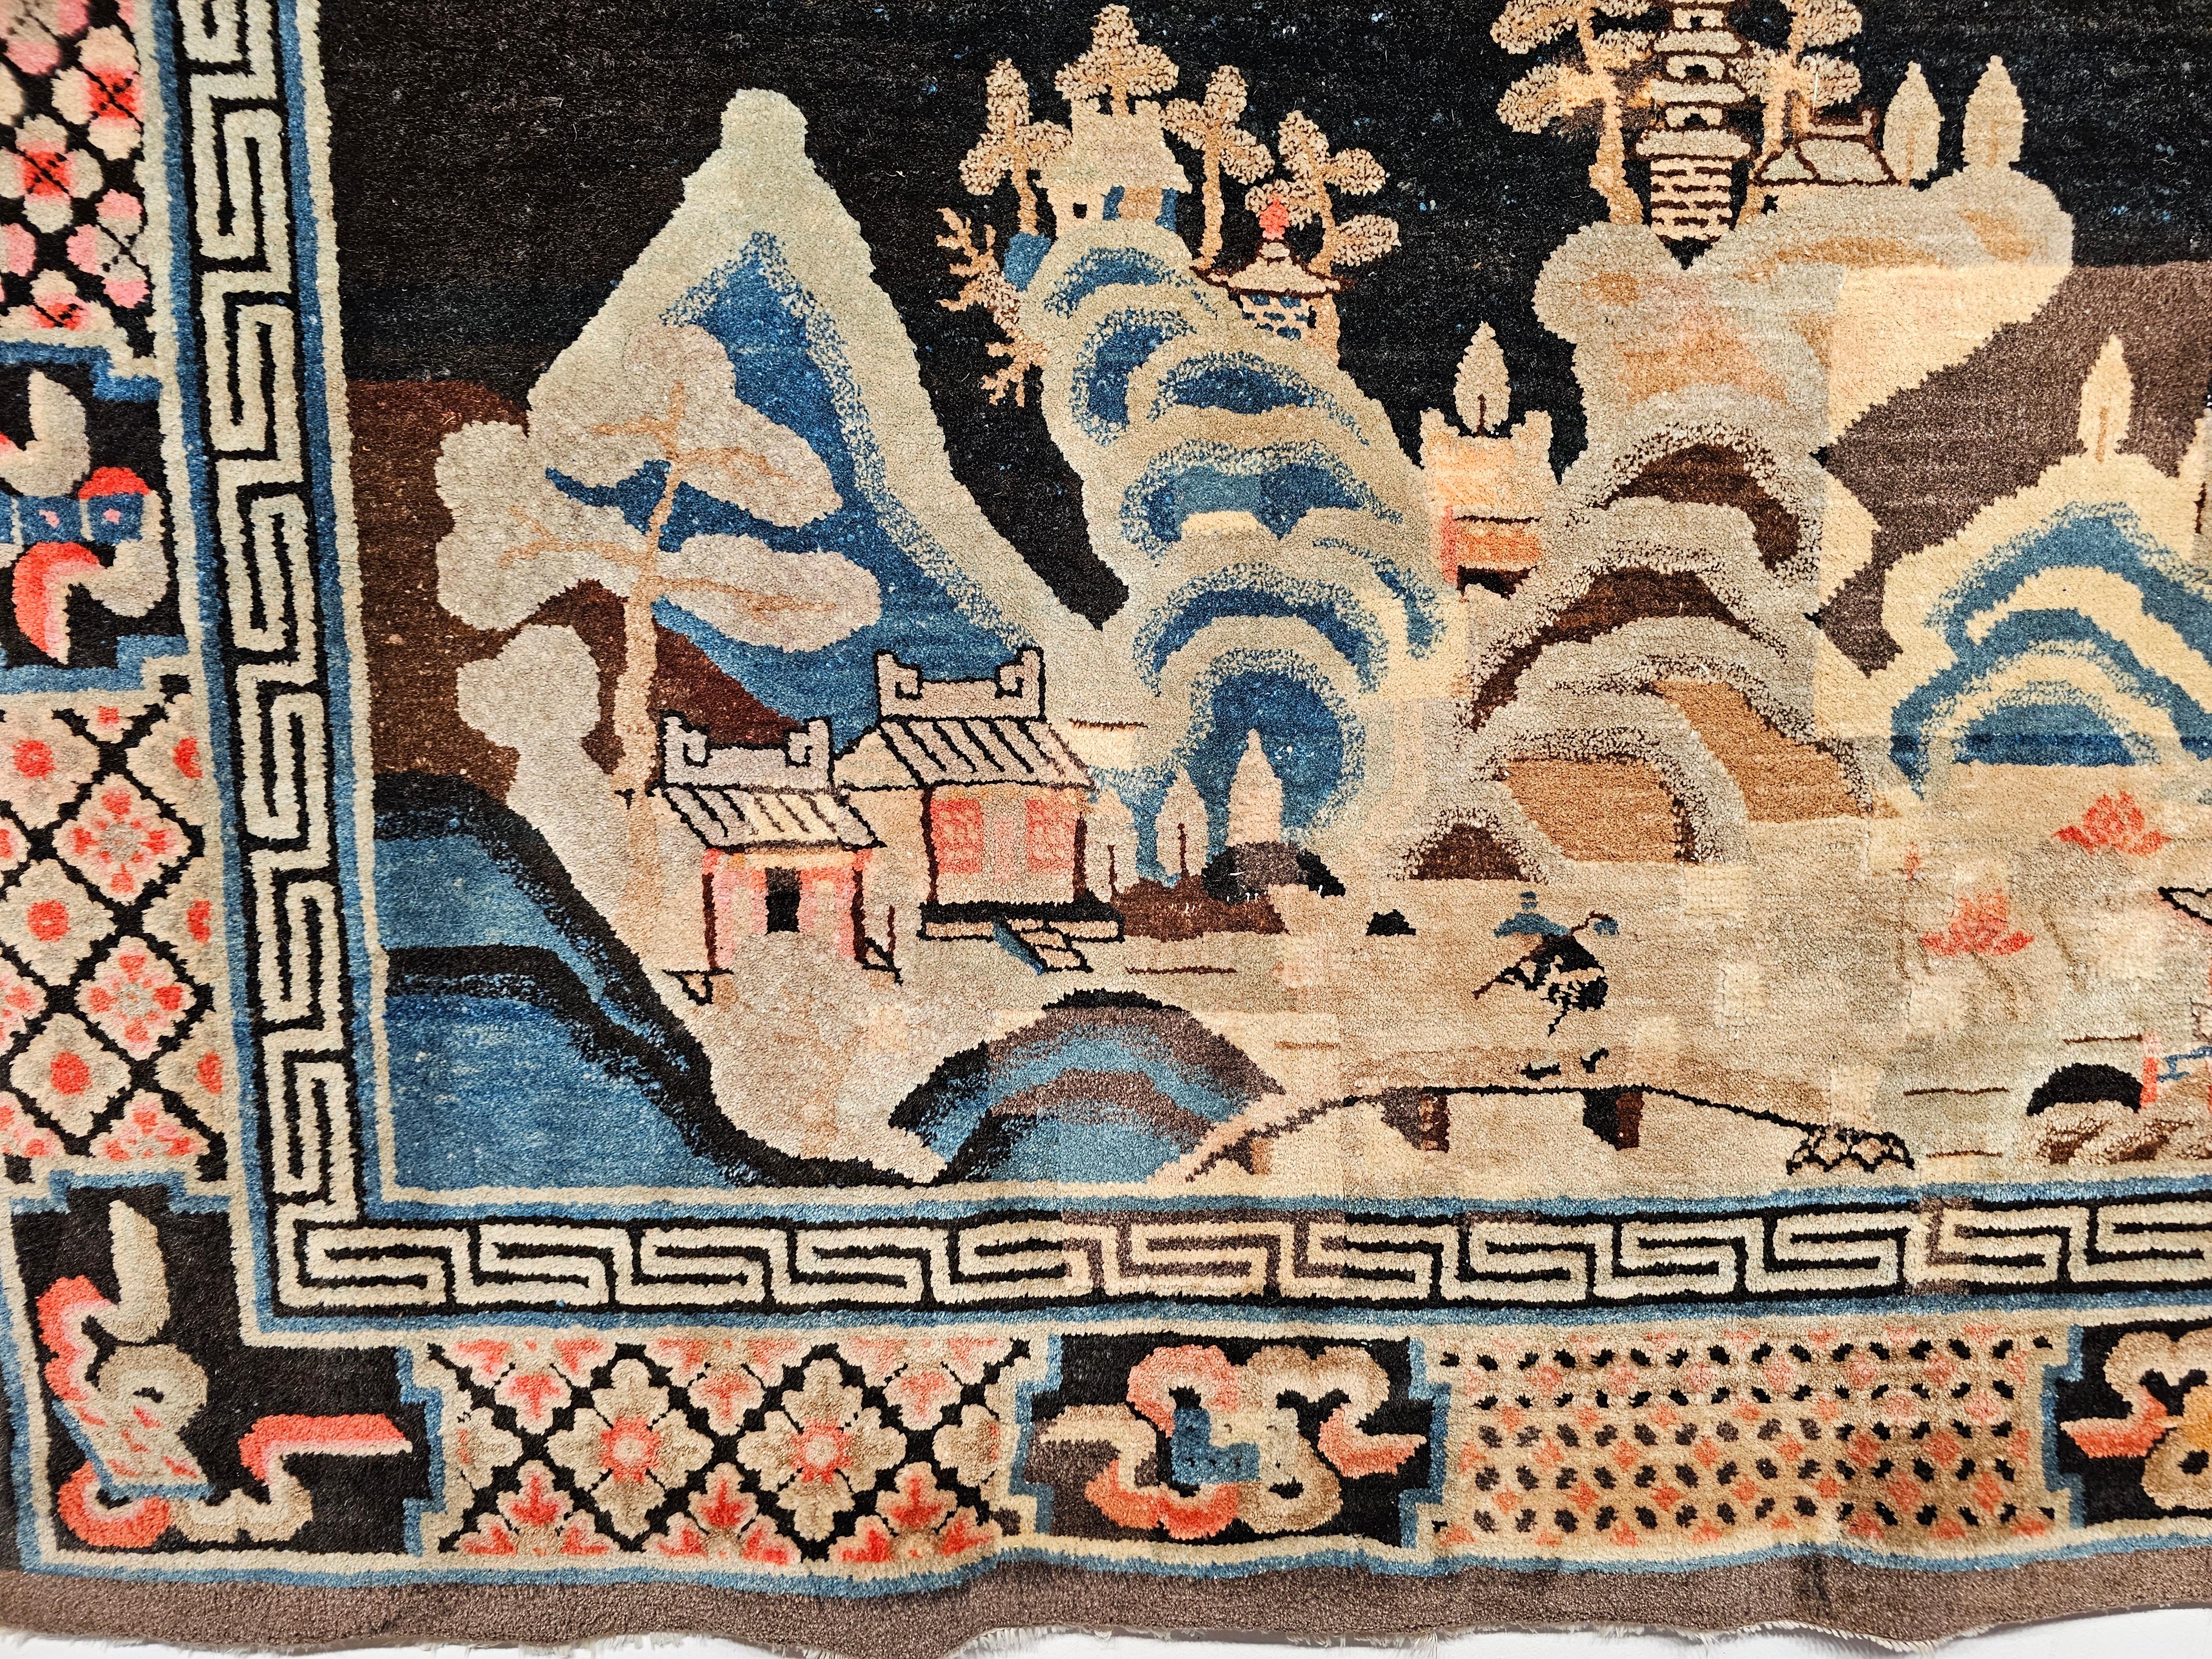 19th Century Late 1800s Ningxia Chinese Rug with A Pictorial Design of Forest, Mountains For Sale